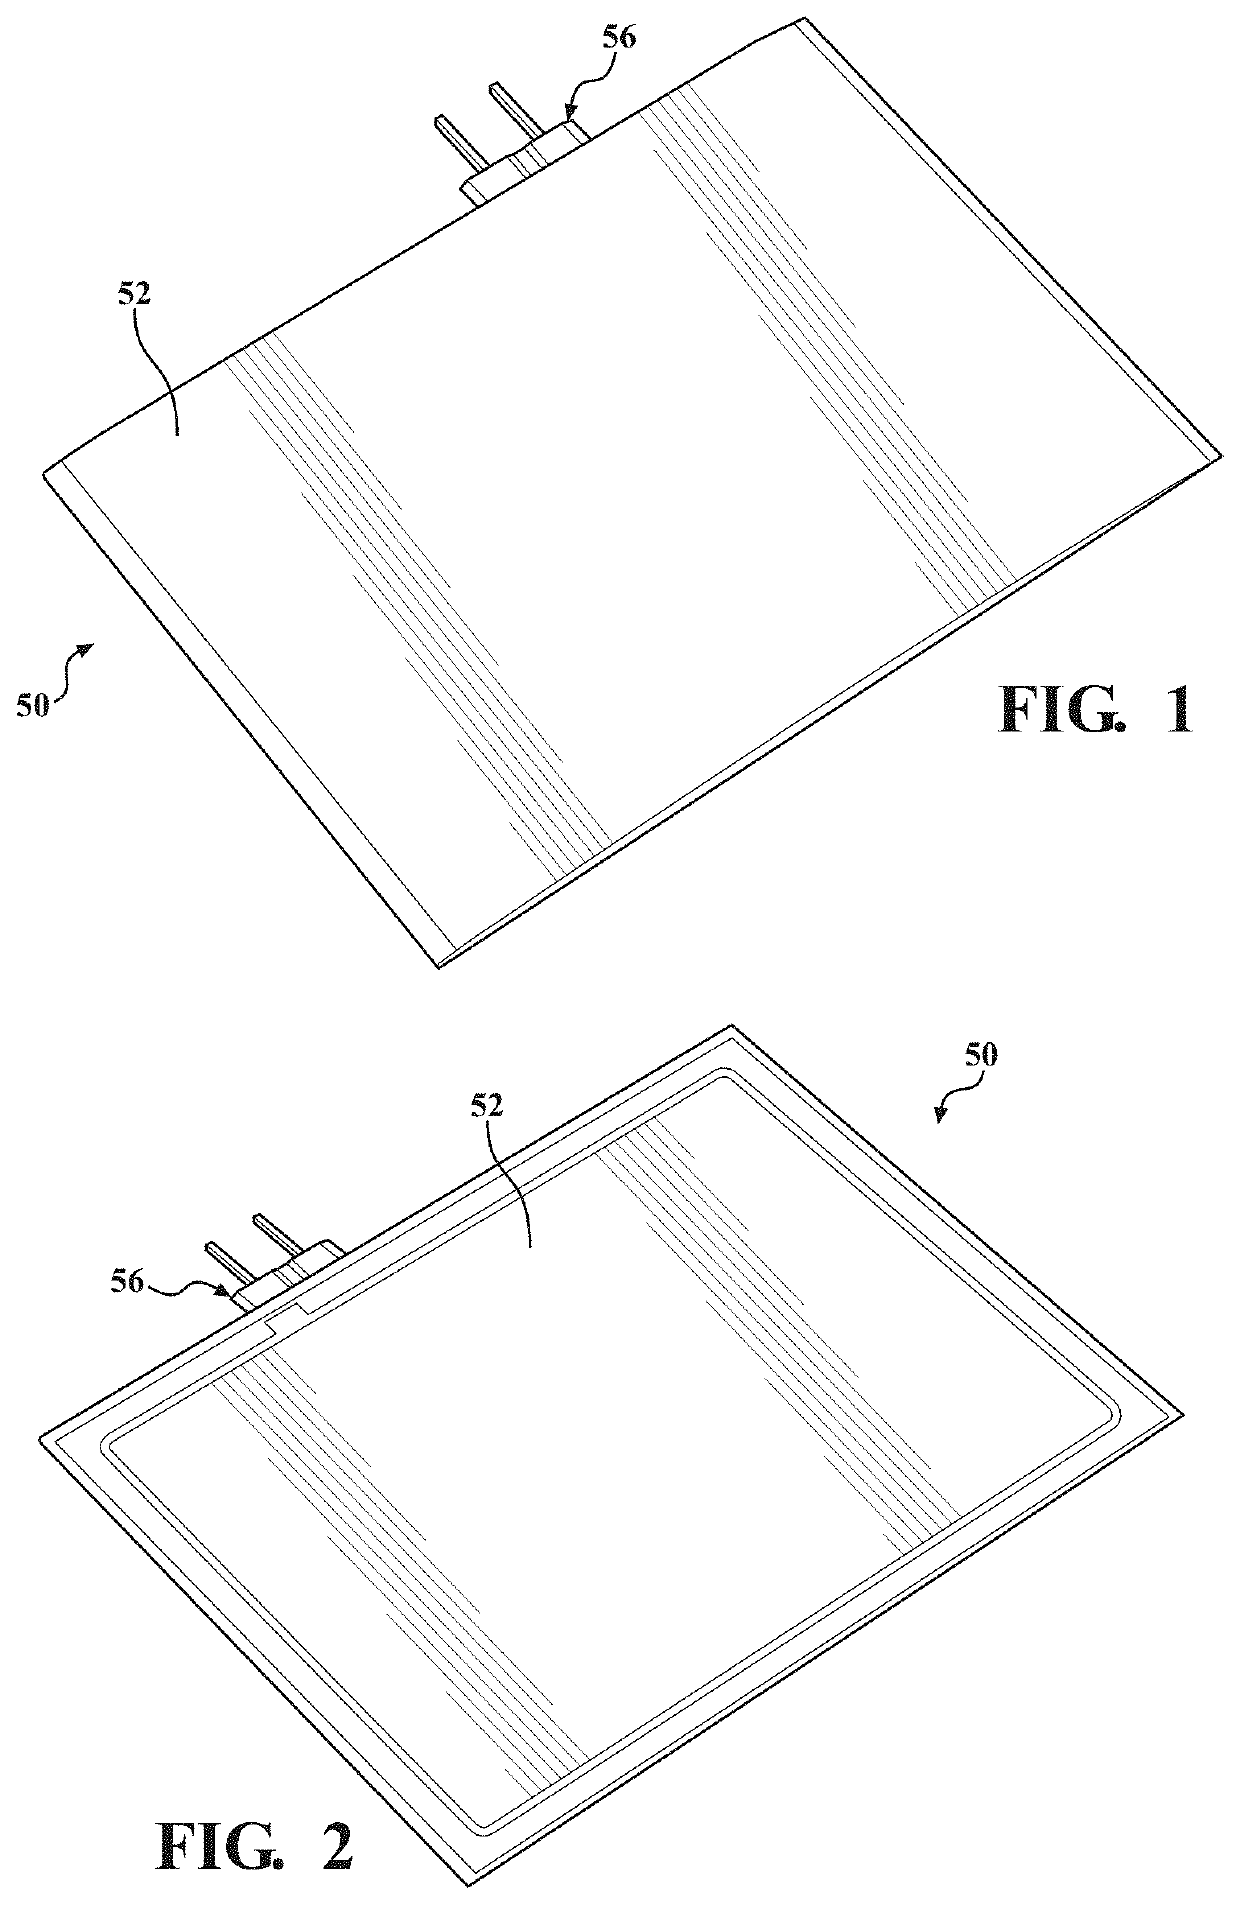 Portable Pain Relief Device Utilizing Polymer Based Materials or a Combination of EL Material and Polymer Based Materials